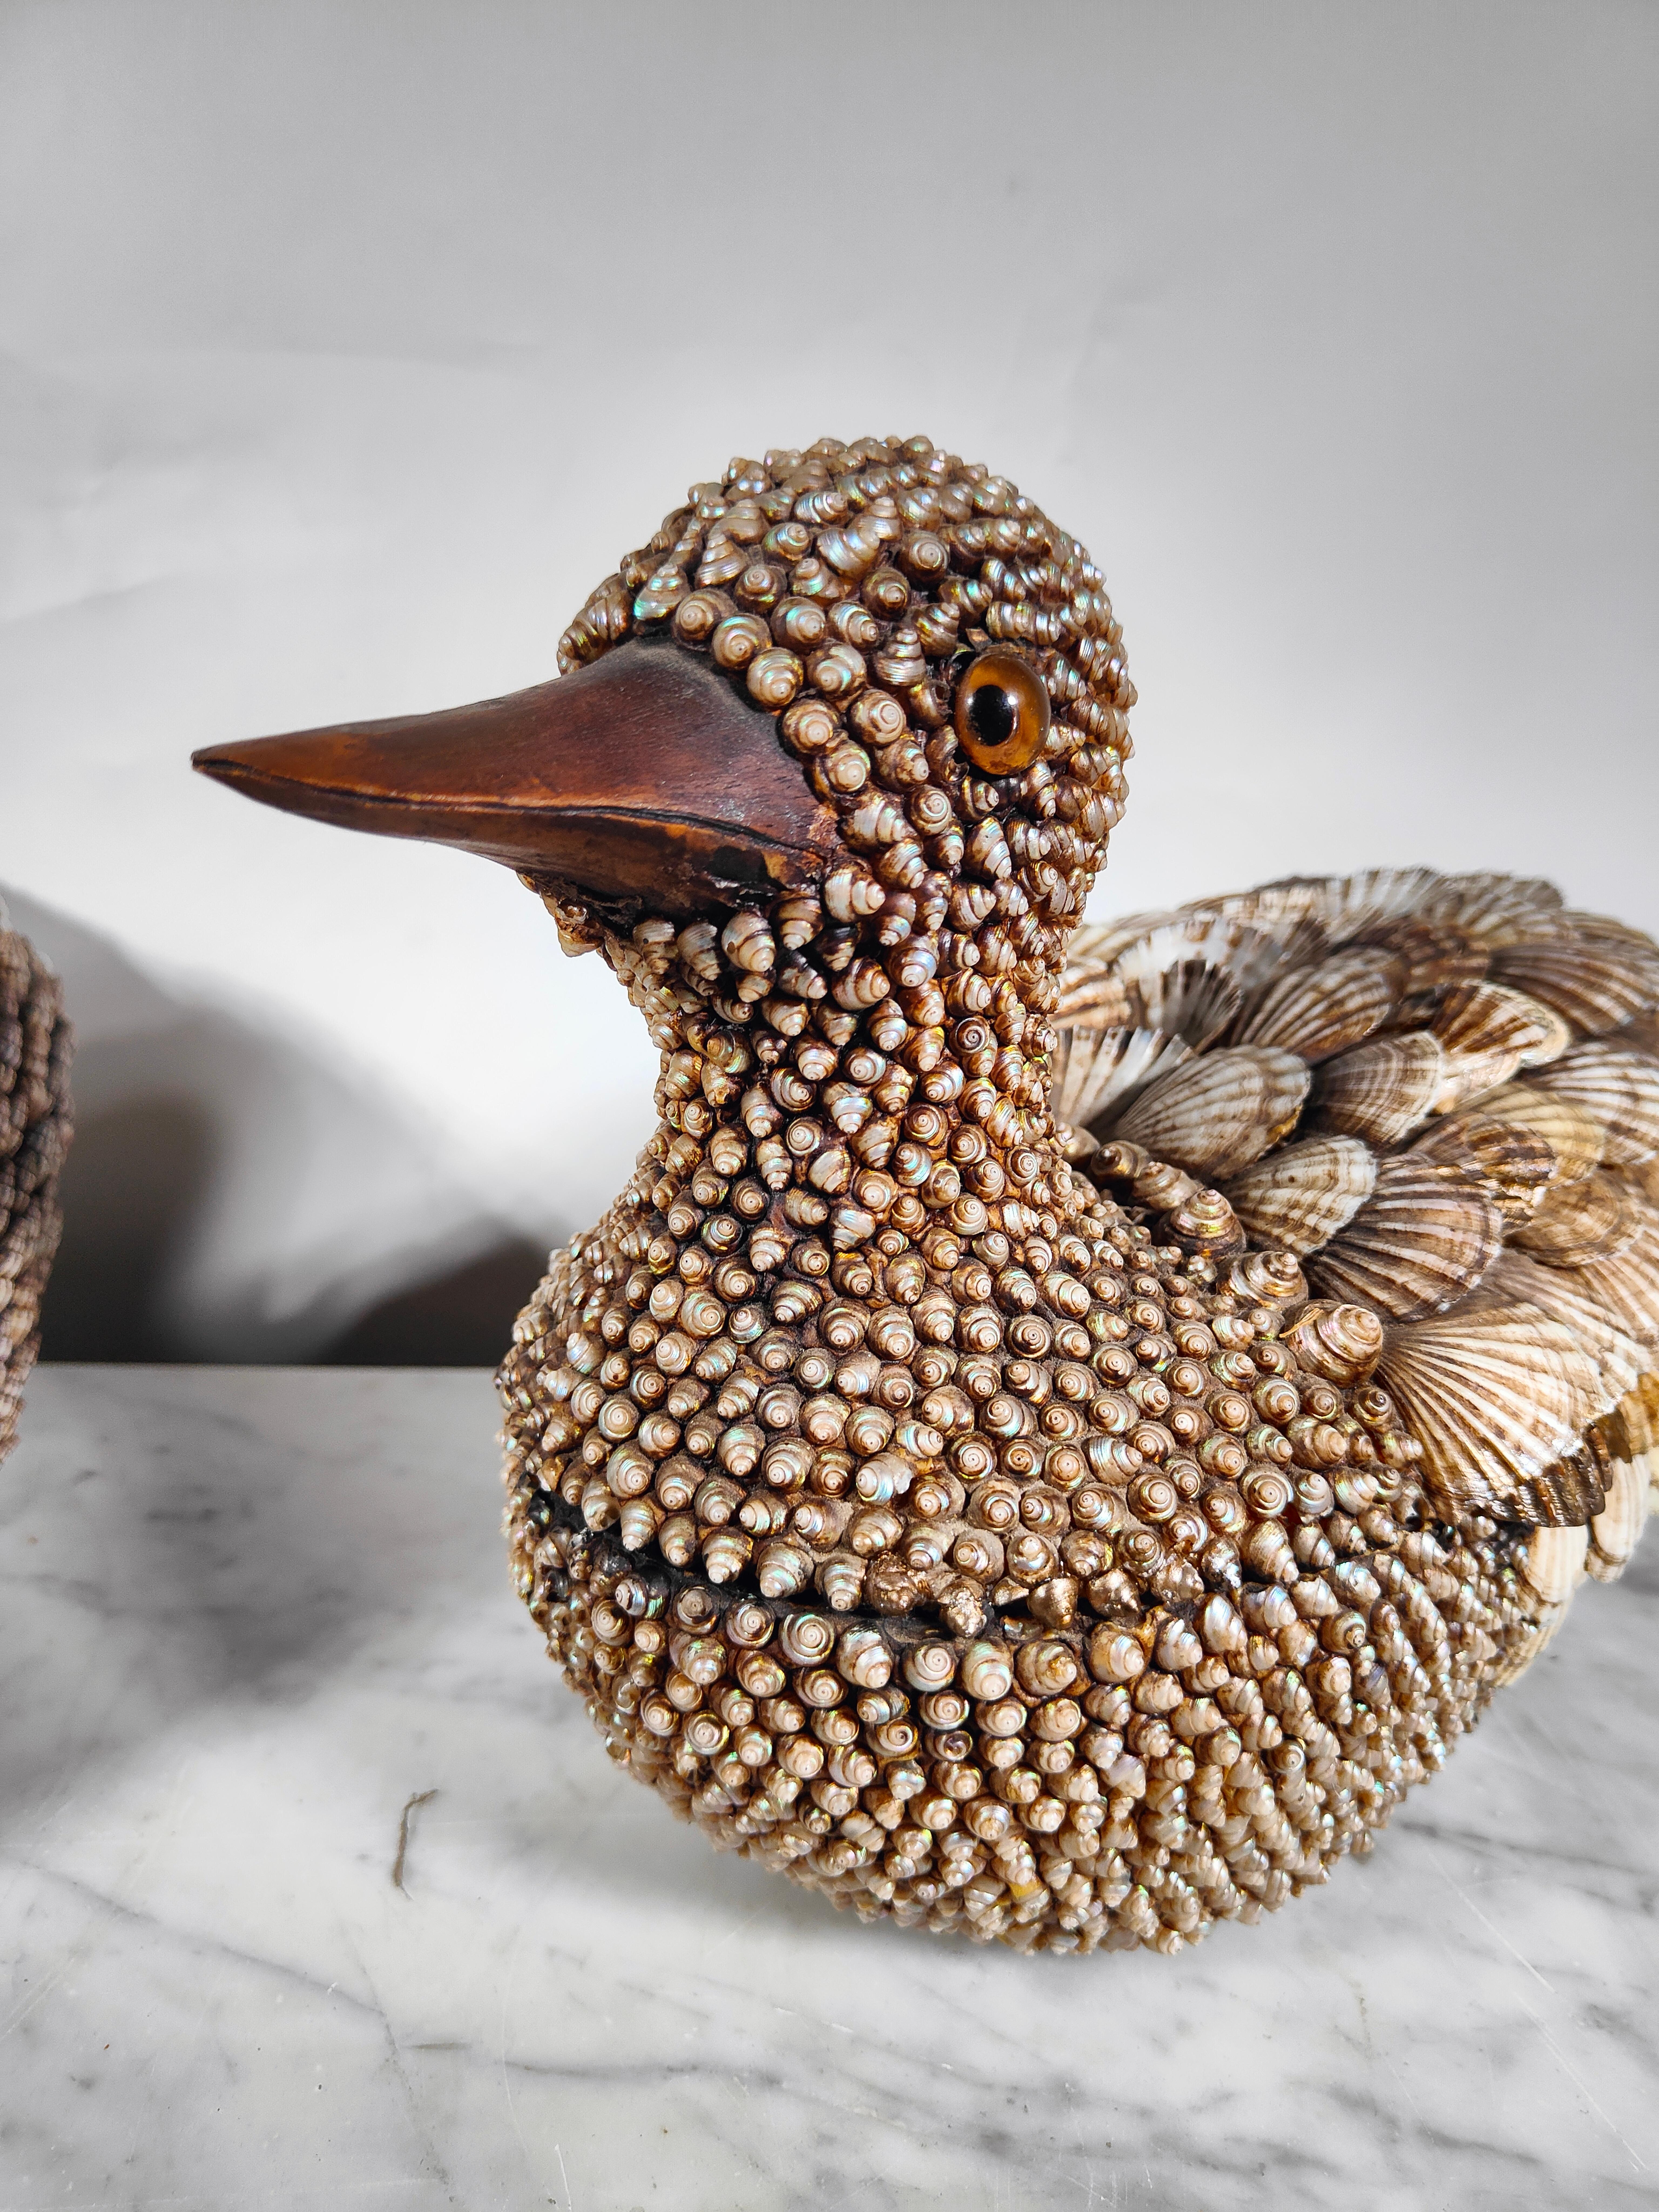 Fruitwood Anthony Redmile Shell Encrusted Ducks Boxes For Sale